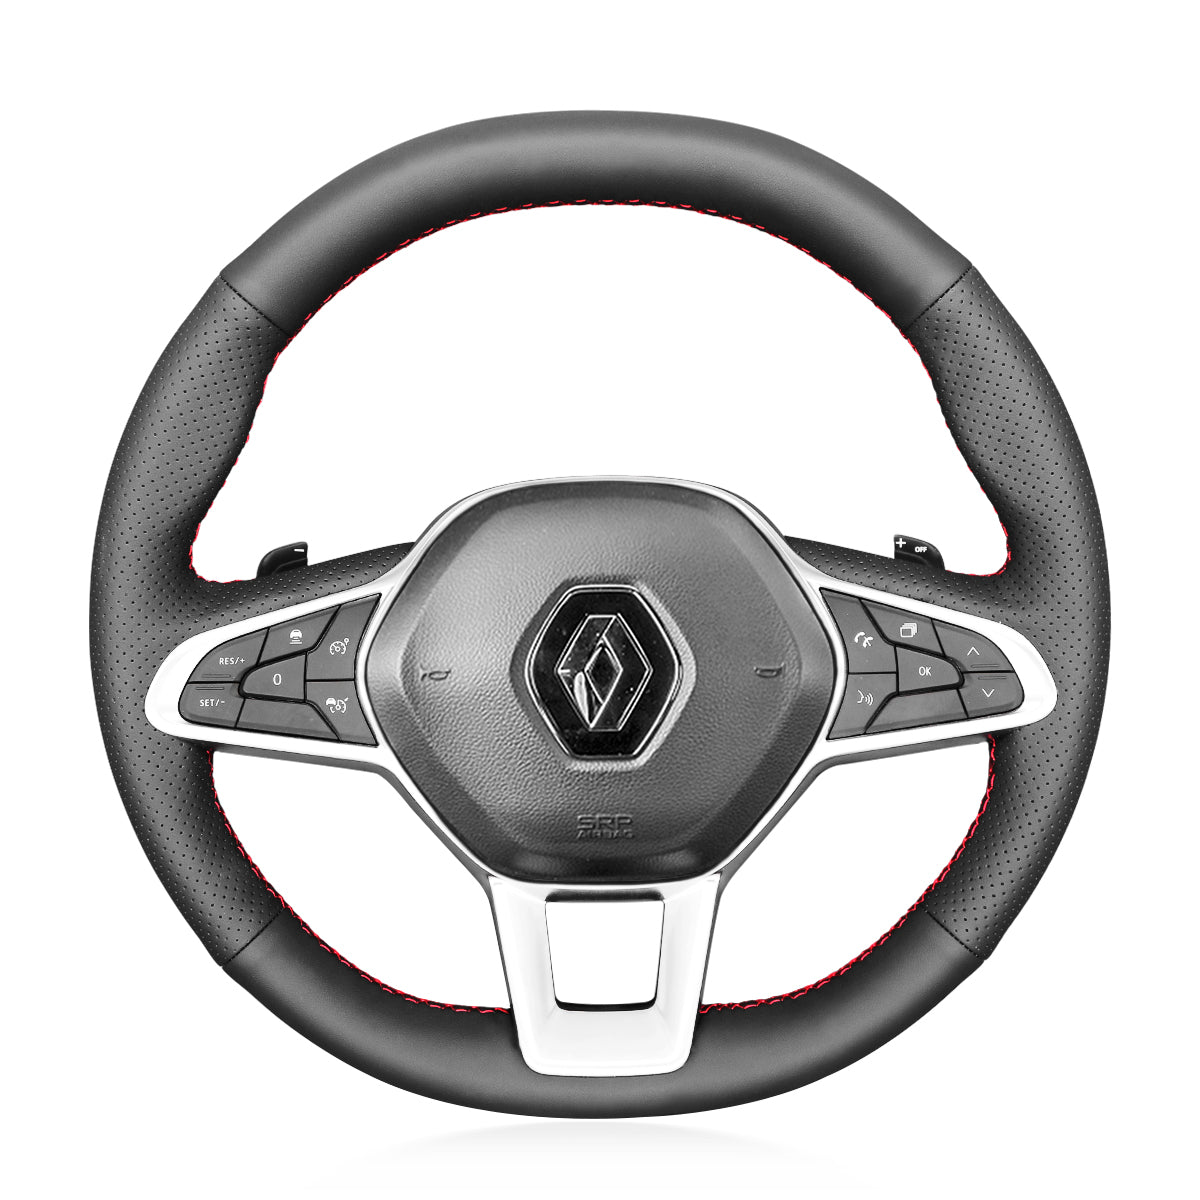 MEWANT Hand Stitch Black Suede Leather Car Steering Wheel Cover for Renault Clio 5 (V) 2019-2020 / Captur 2 2020 / Zoe 2020